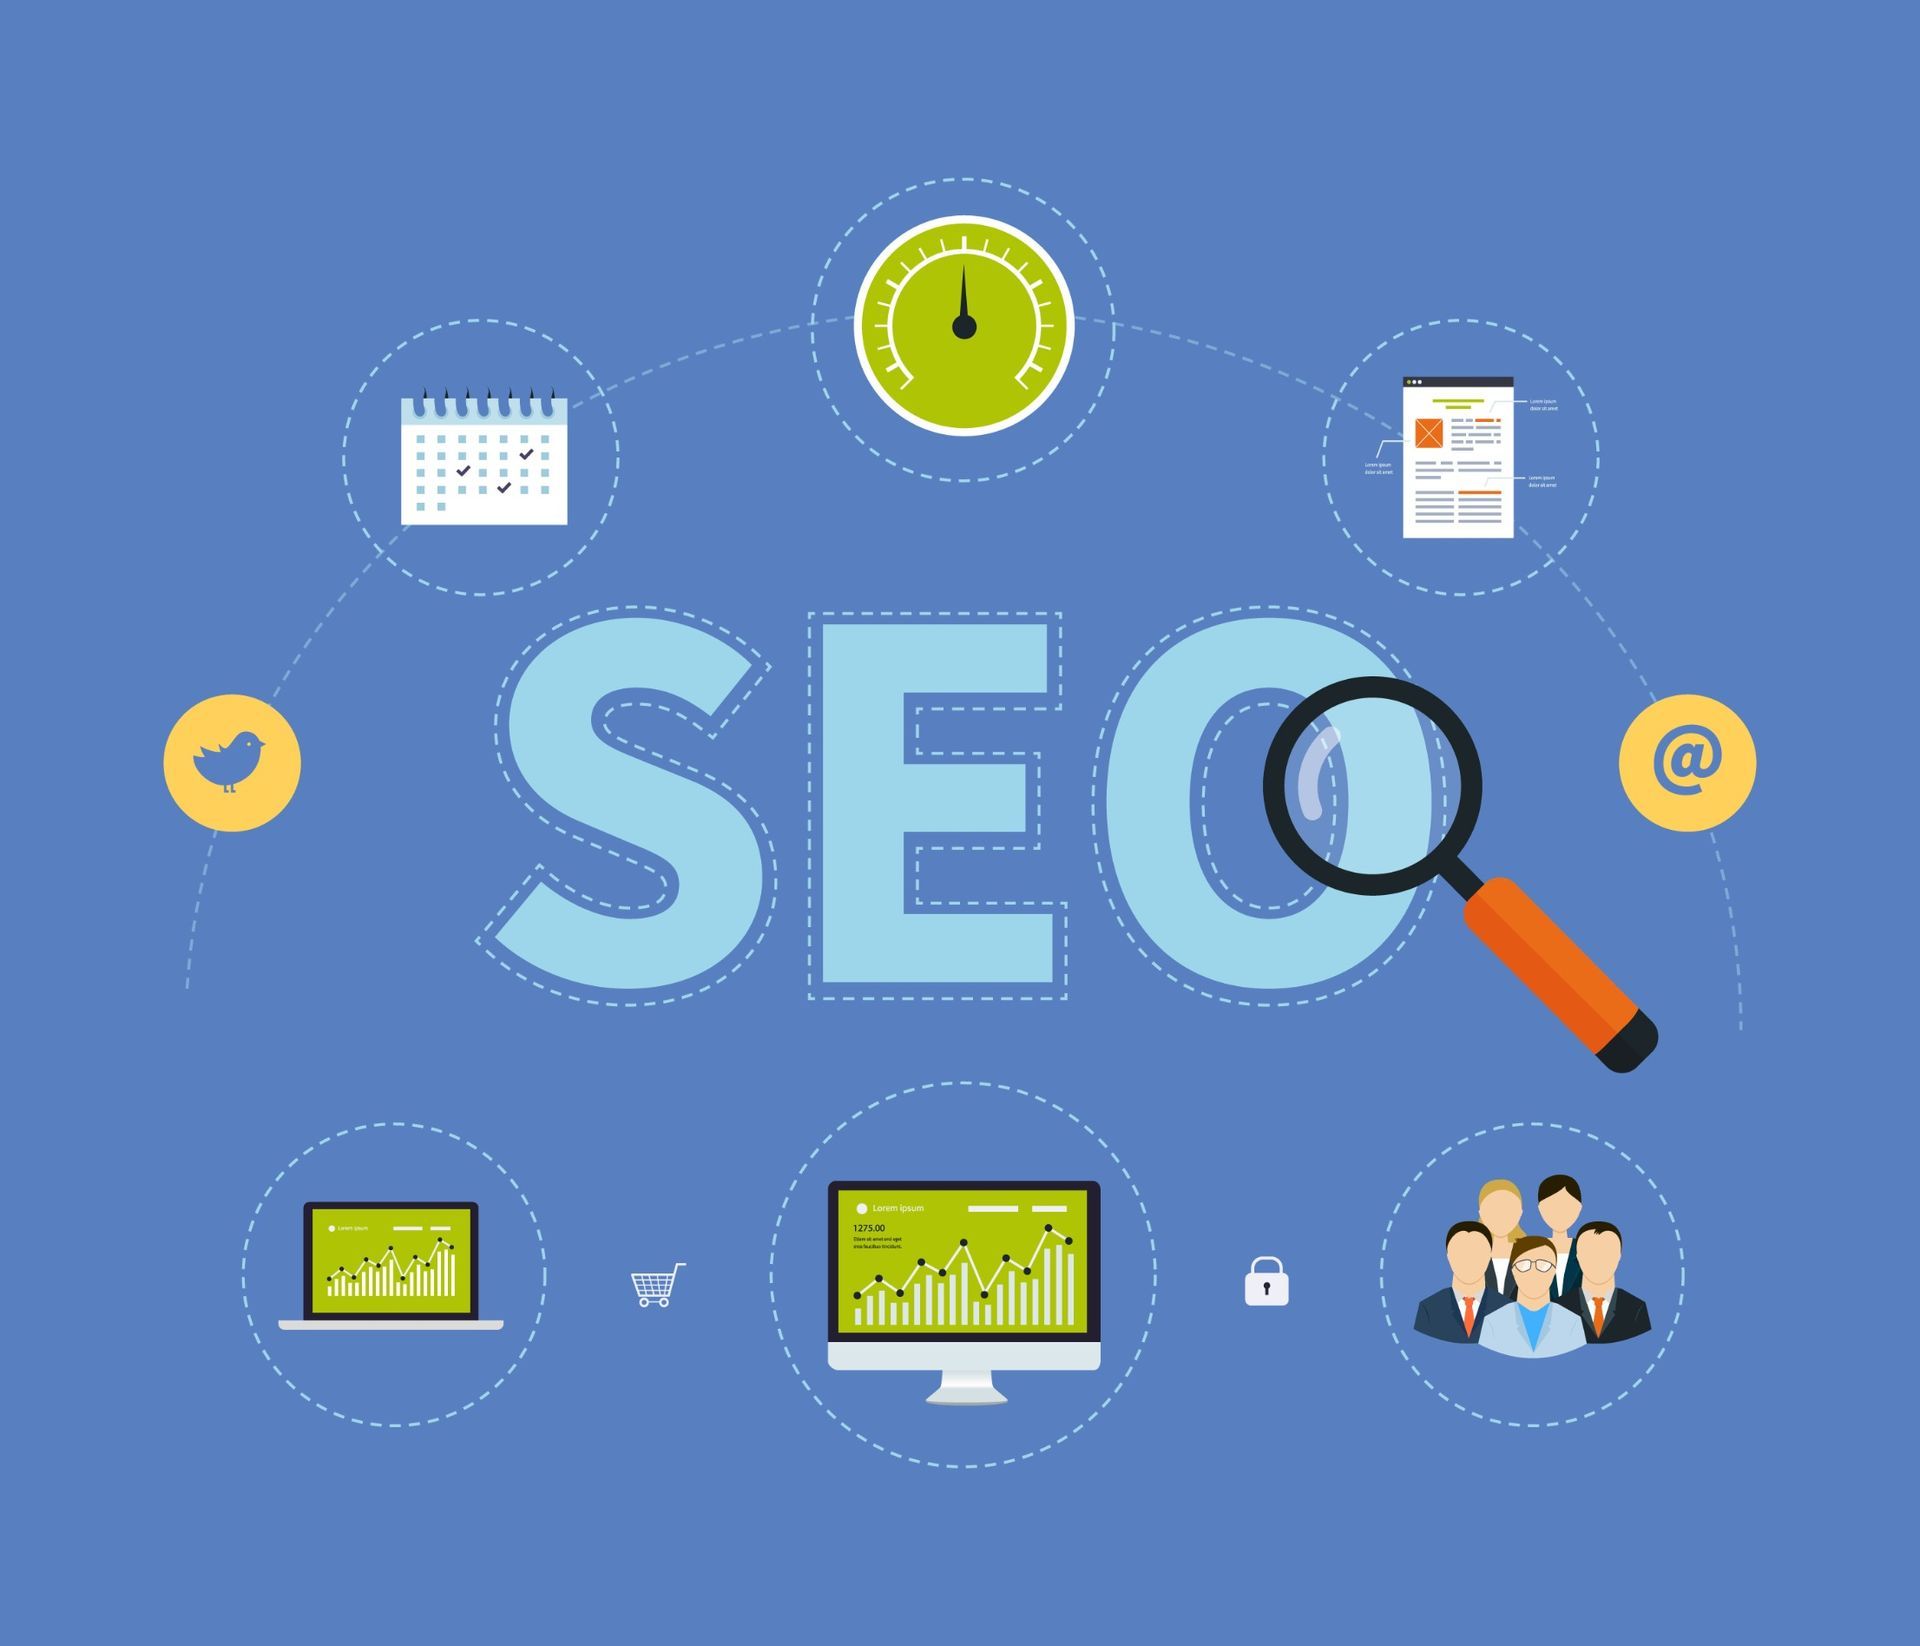 SEO Graphic showing diffrent SEO elements